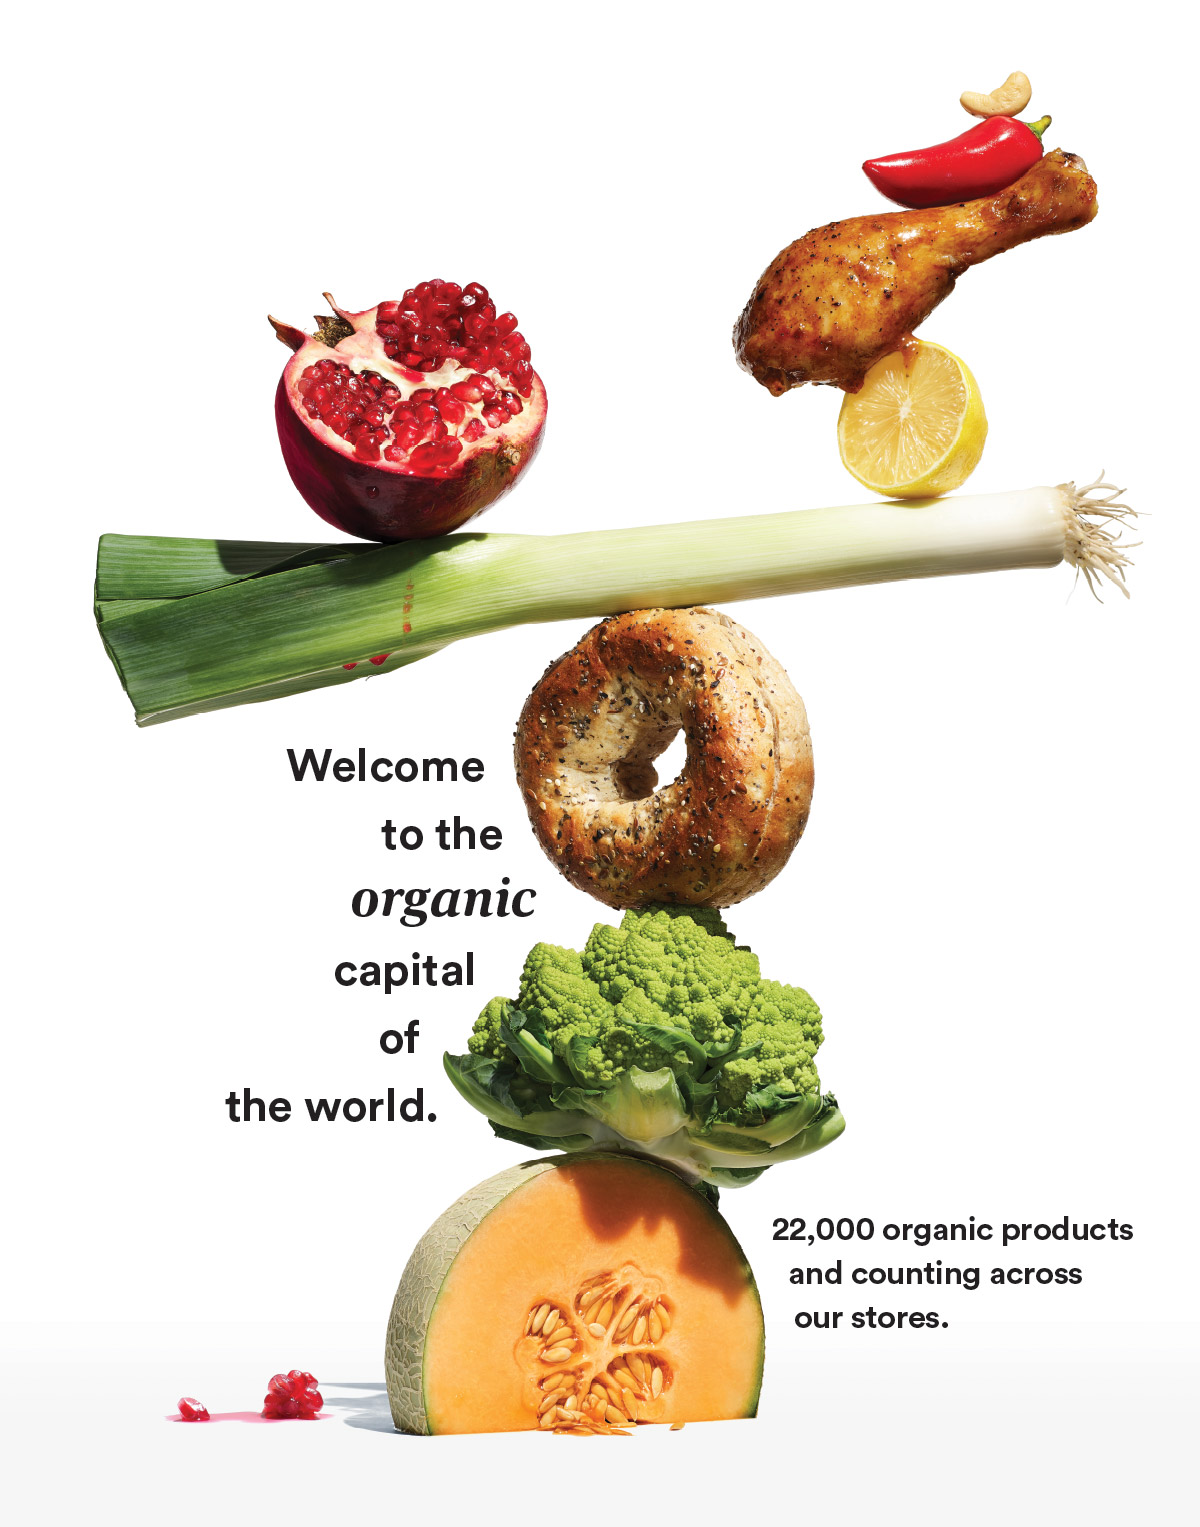 Whole Foods: Creating An Organic Experience - Technology and